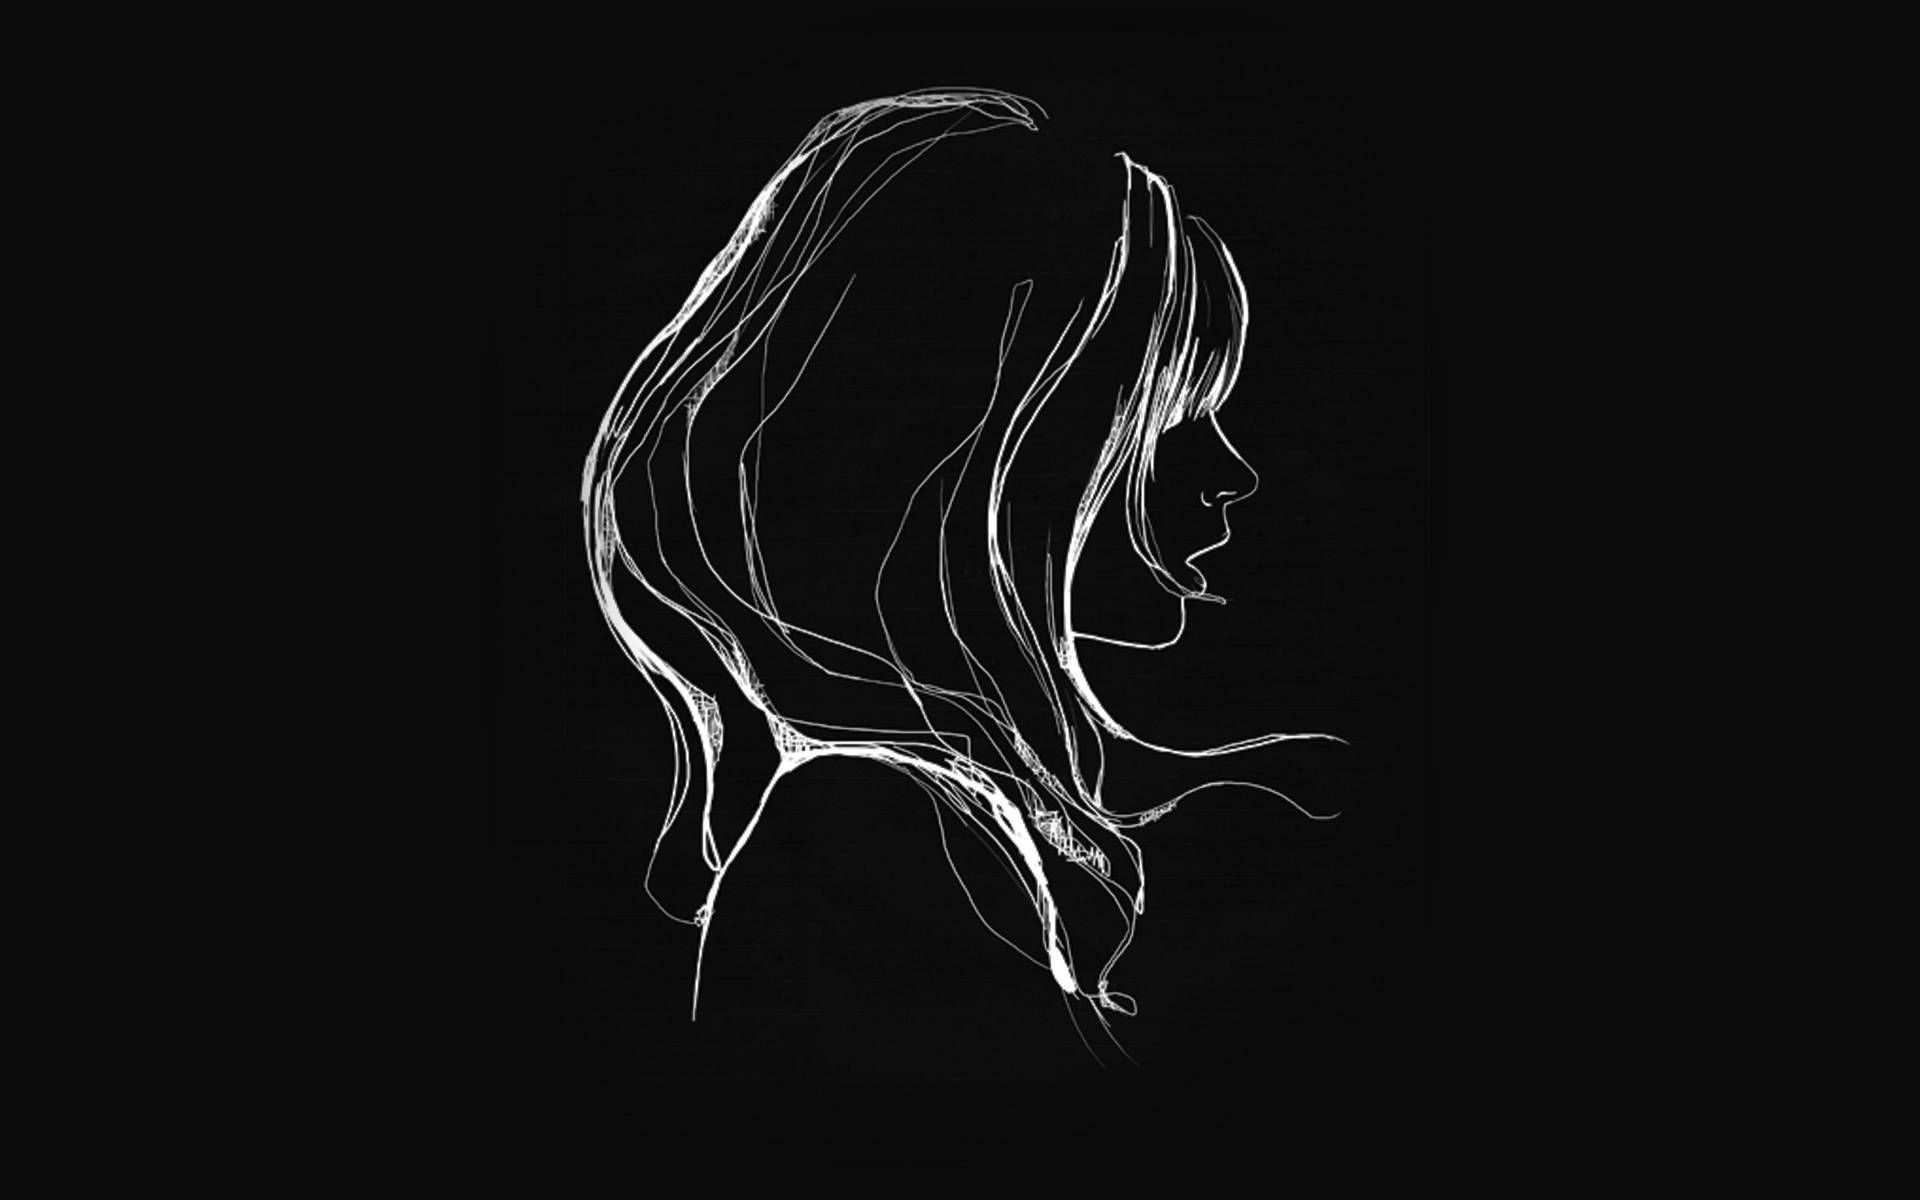 A woman's face is drawn in white on black - Hand drawn